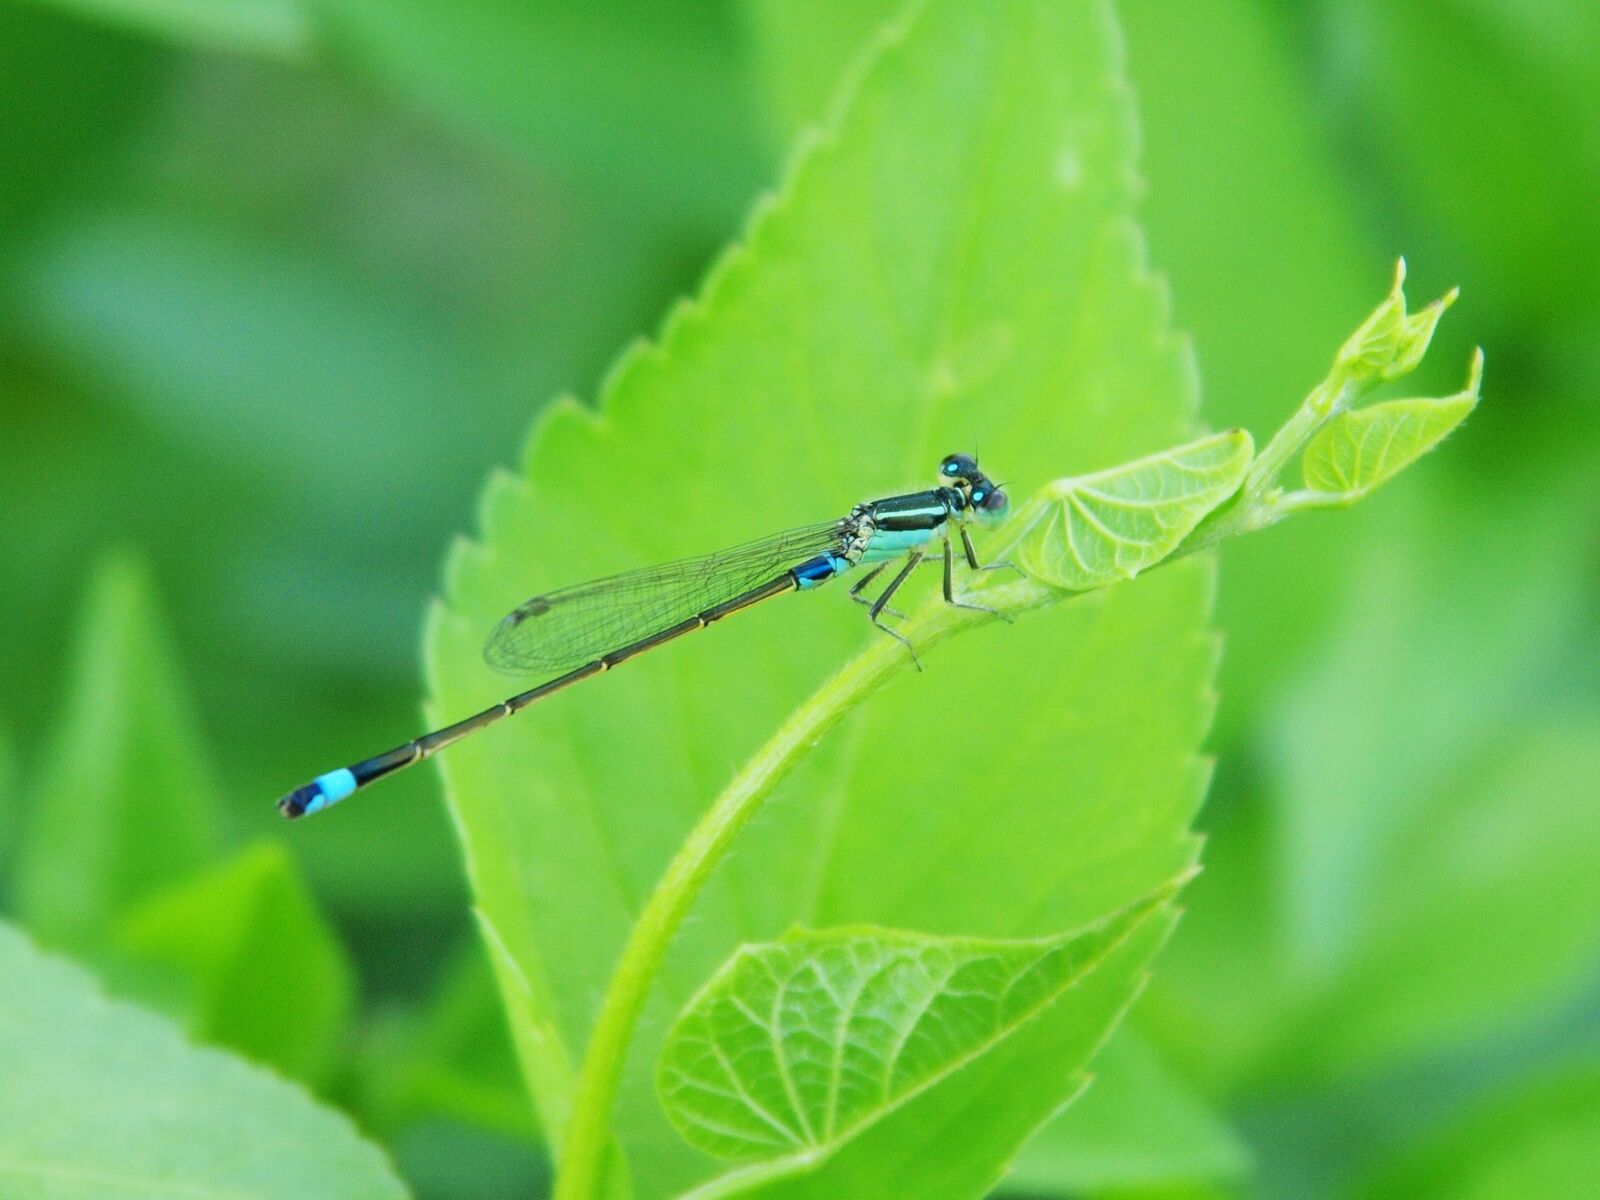 Olympus PEN E-P2 sample photo. Damselfly, green leaves, little photography